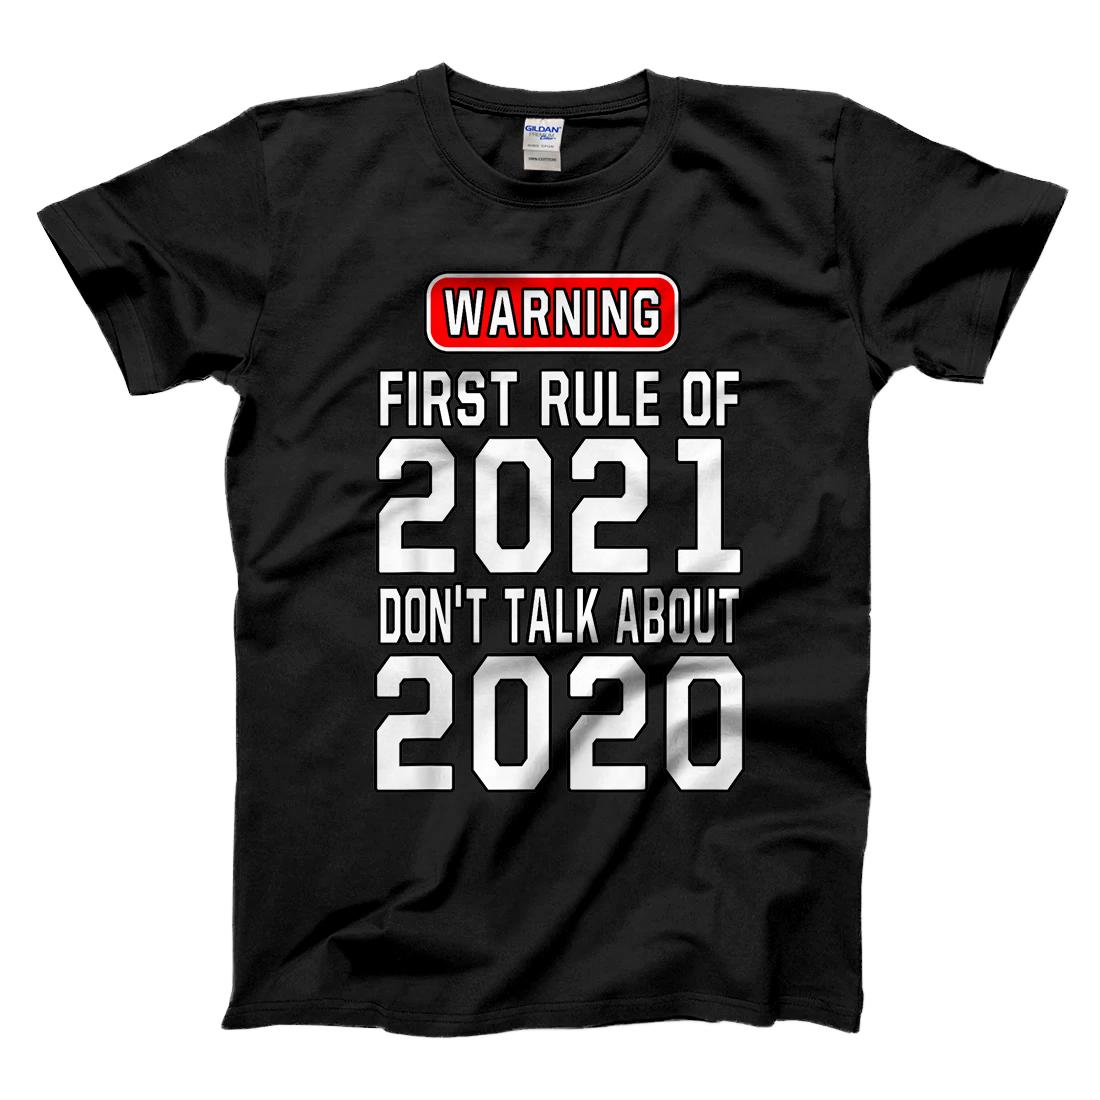 Personalized New Years Eve Special Funny Gift Design Happy New Year 2021 T-Shirt